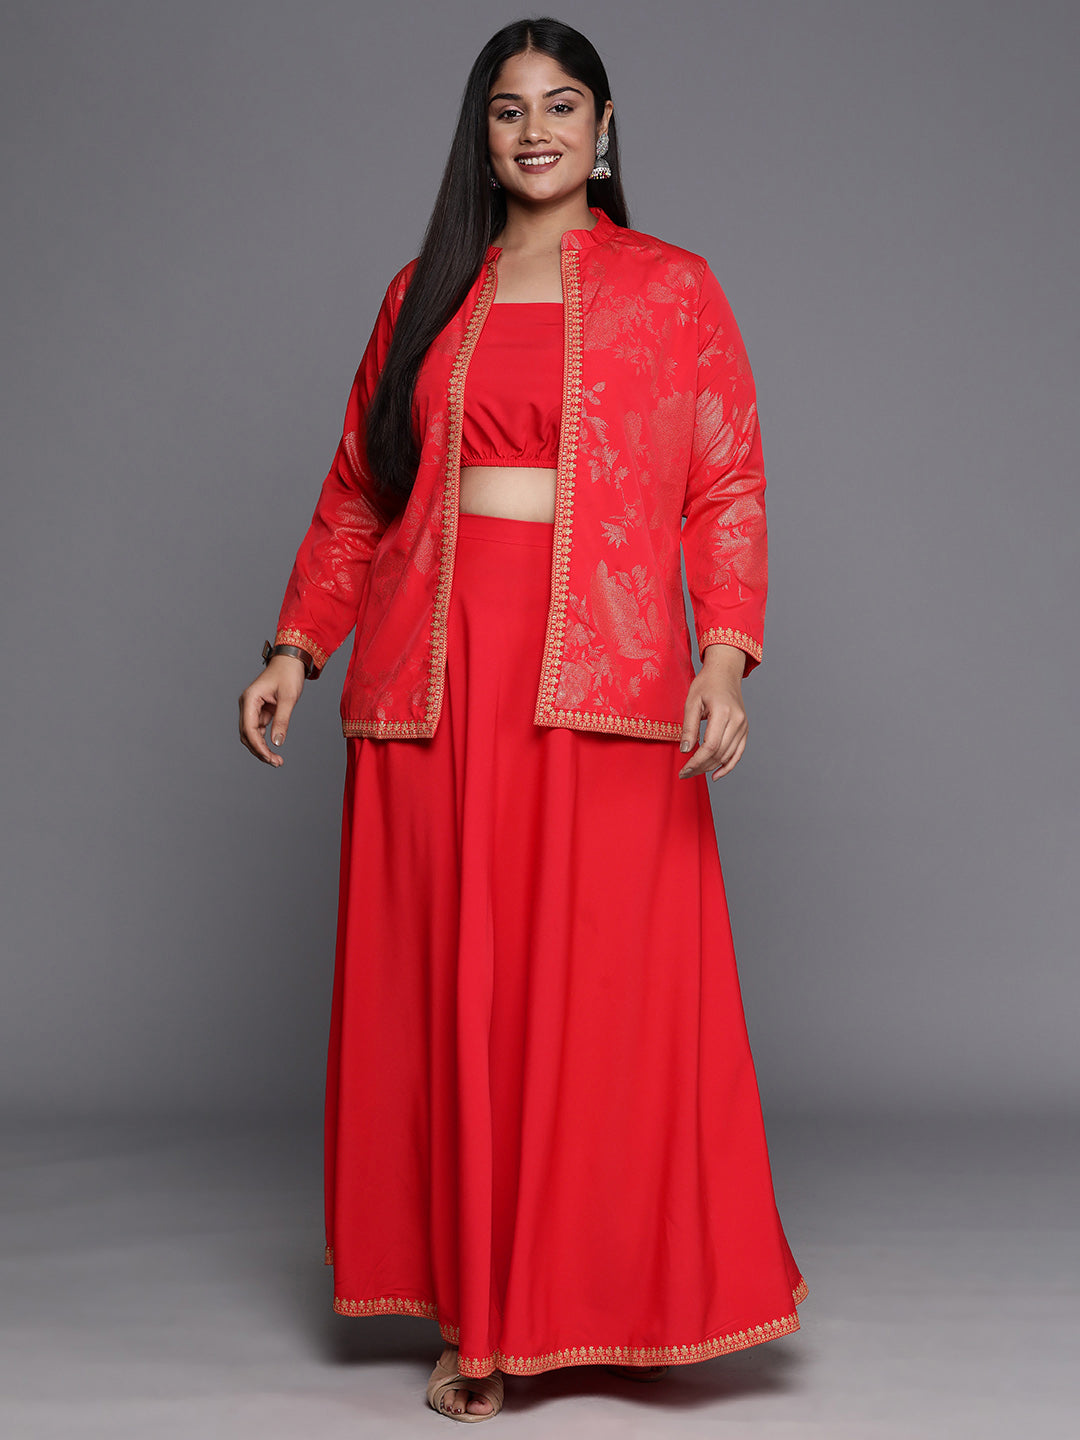 Red Plus Size Ethnic Top & Skirt with Shrug